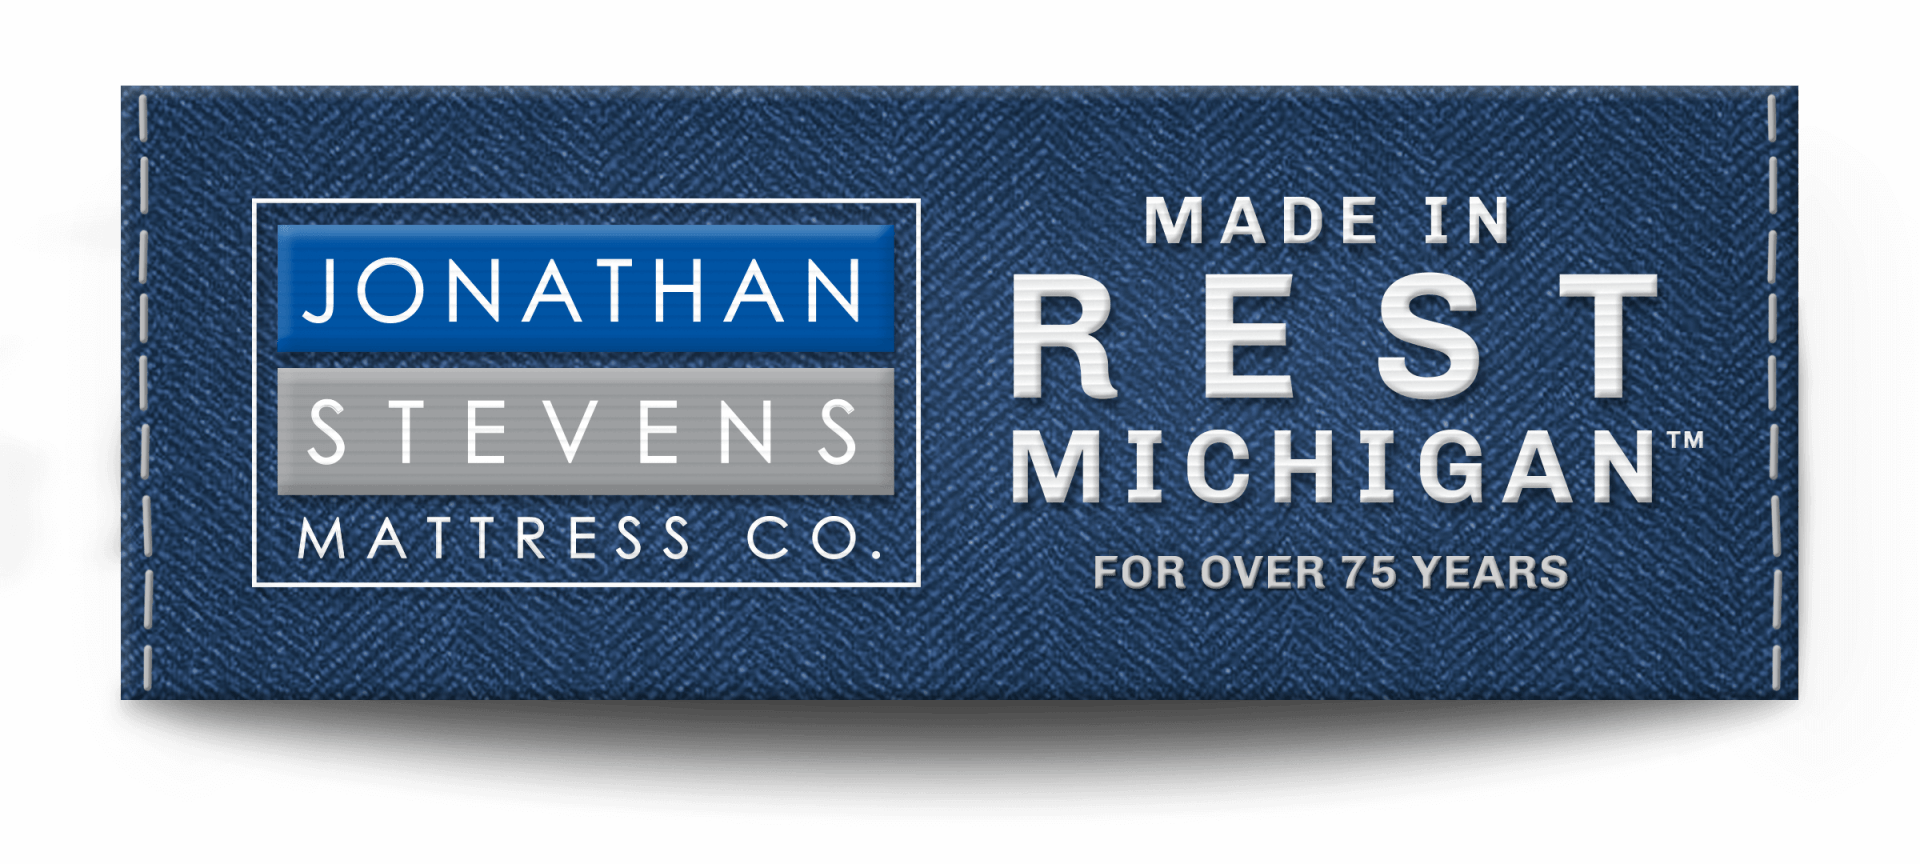 Jonathan Stevens made in Rest Michigan for 75 Years.